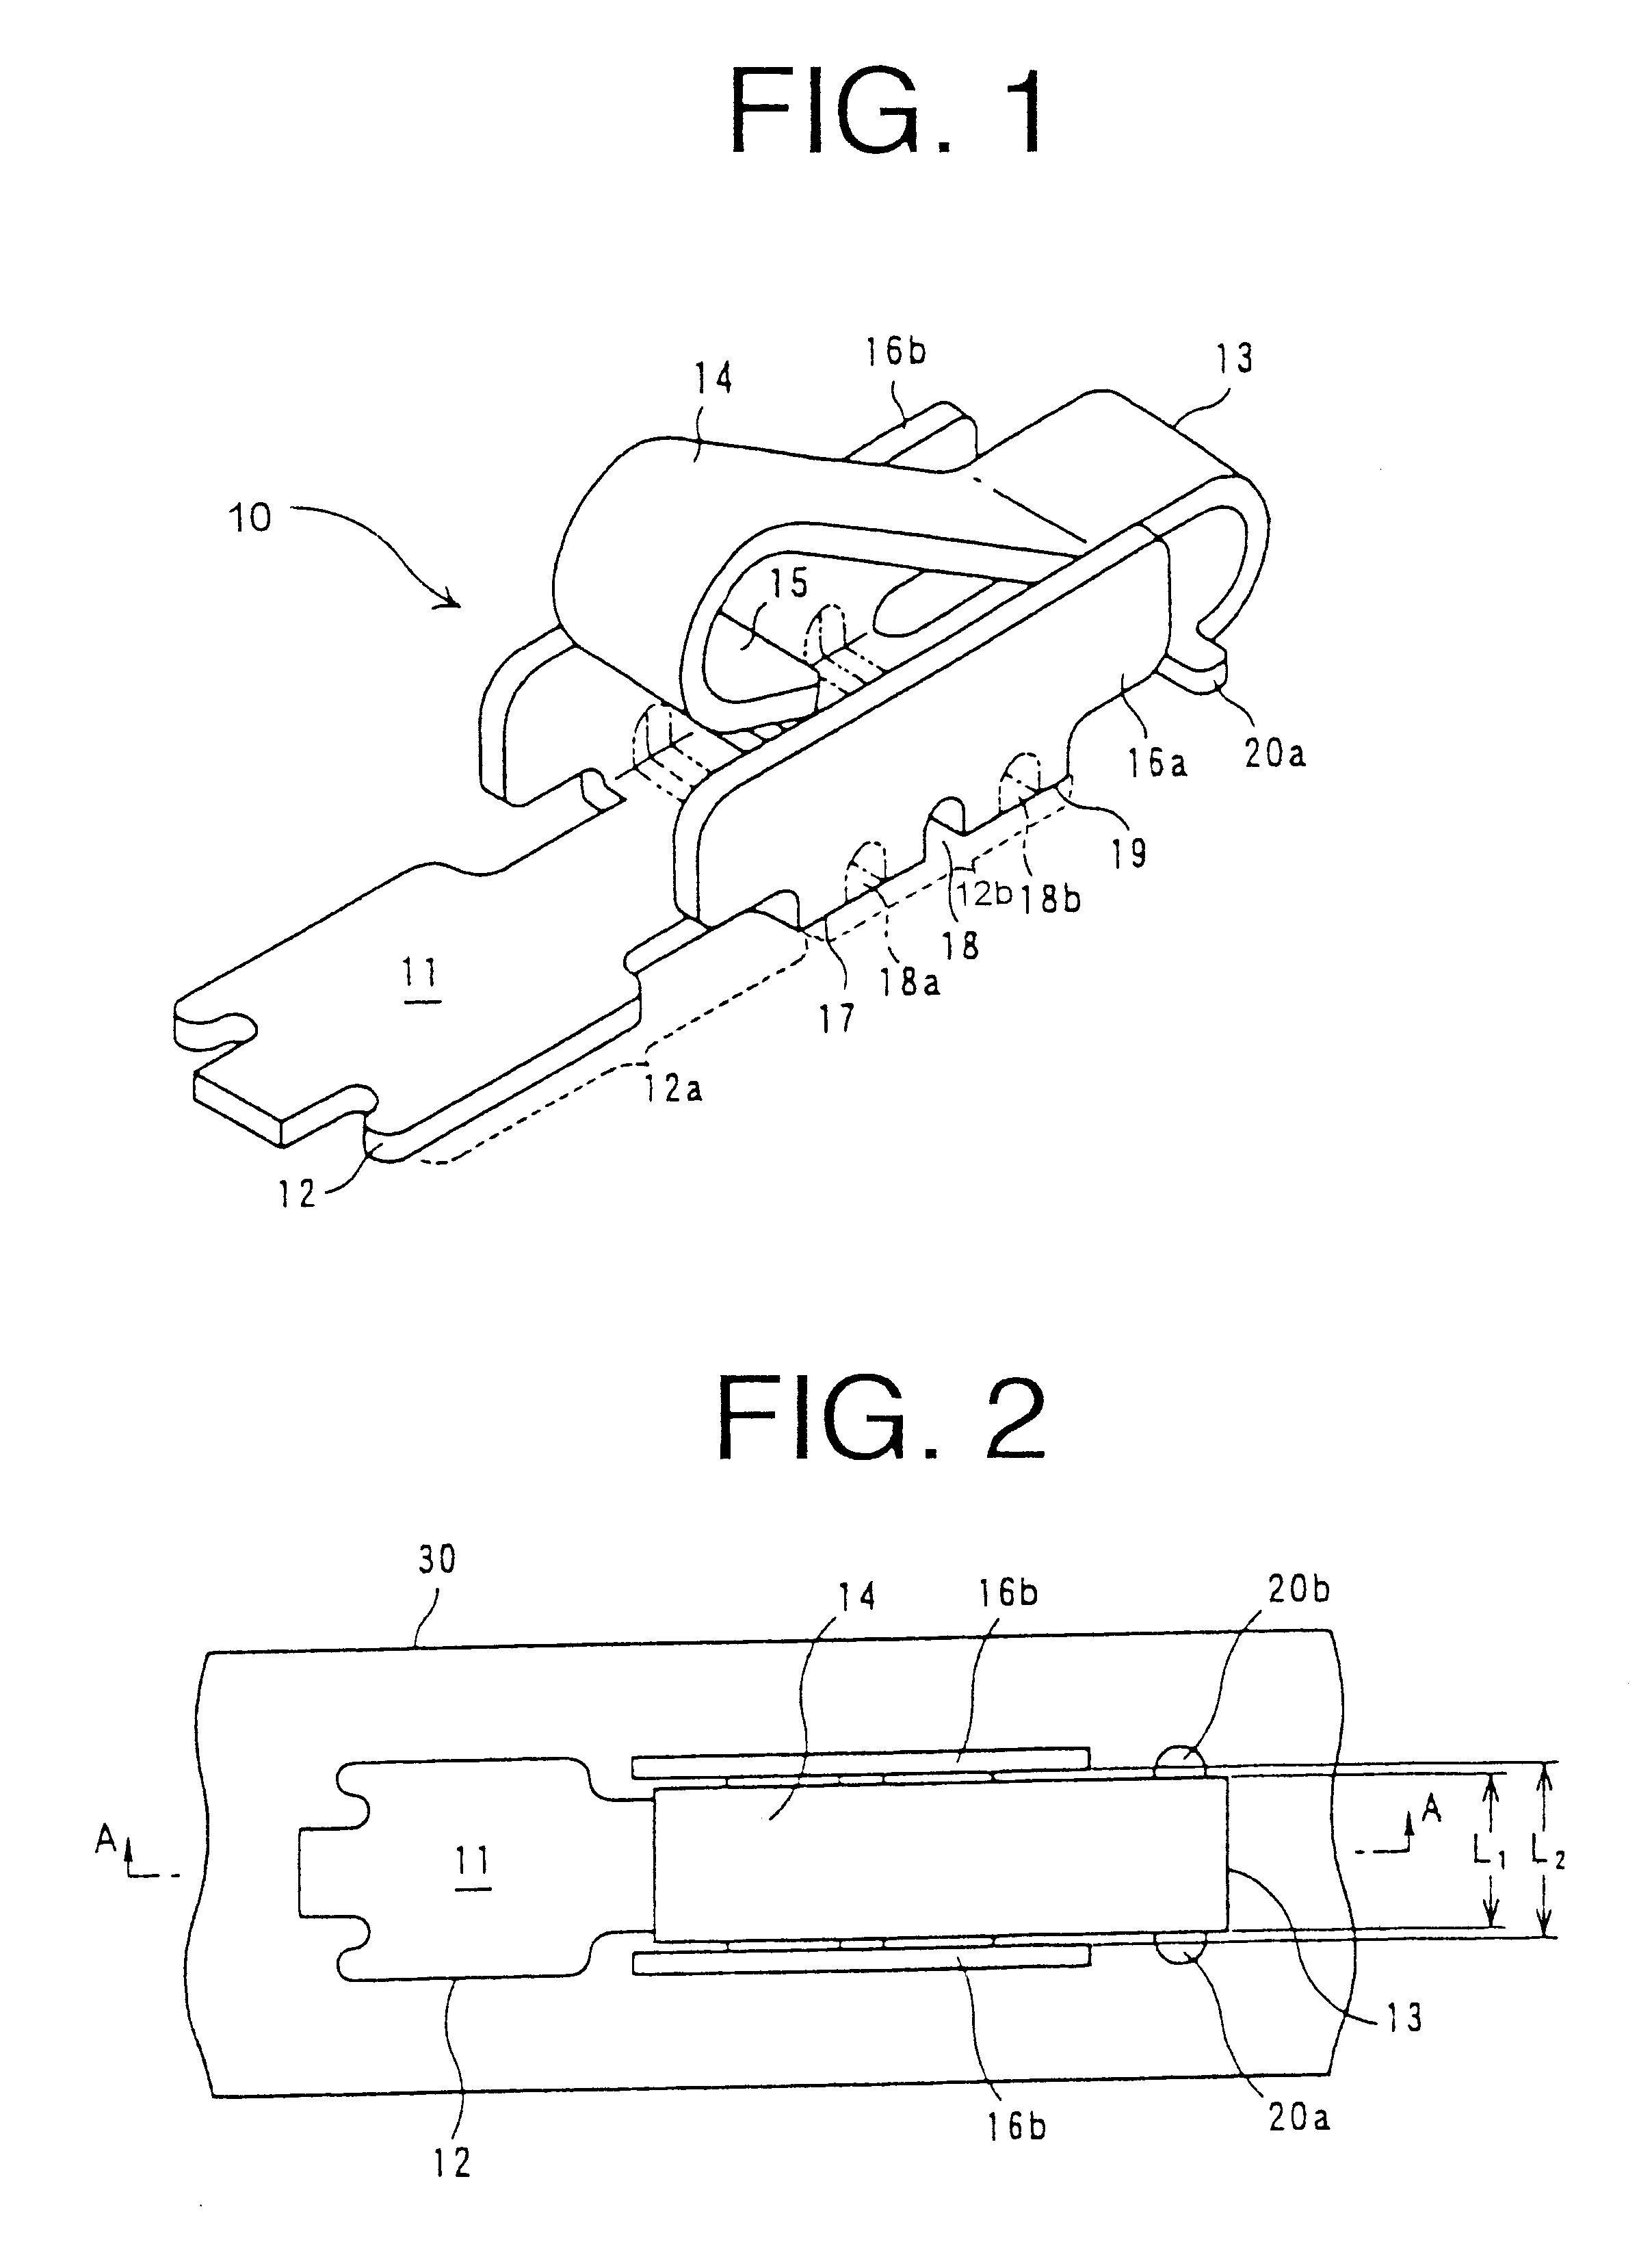 Connecting terminal and method of mounting the same onto a circuit board